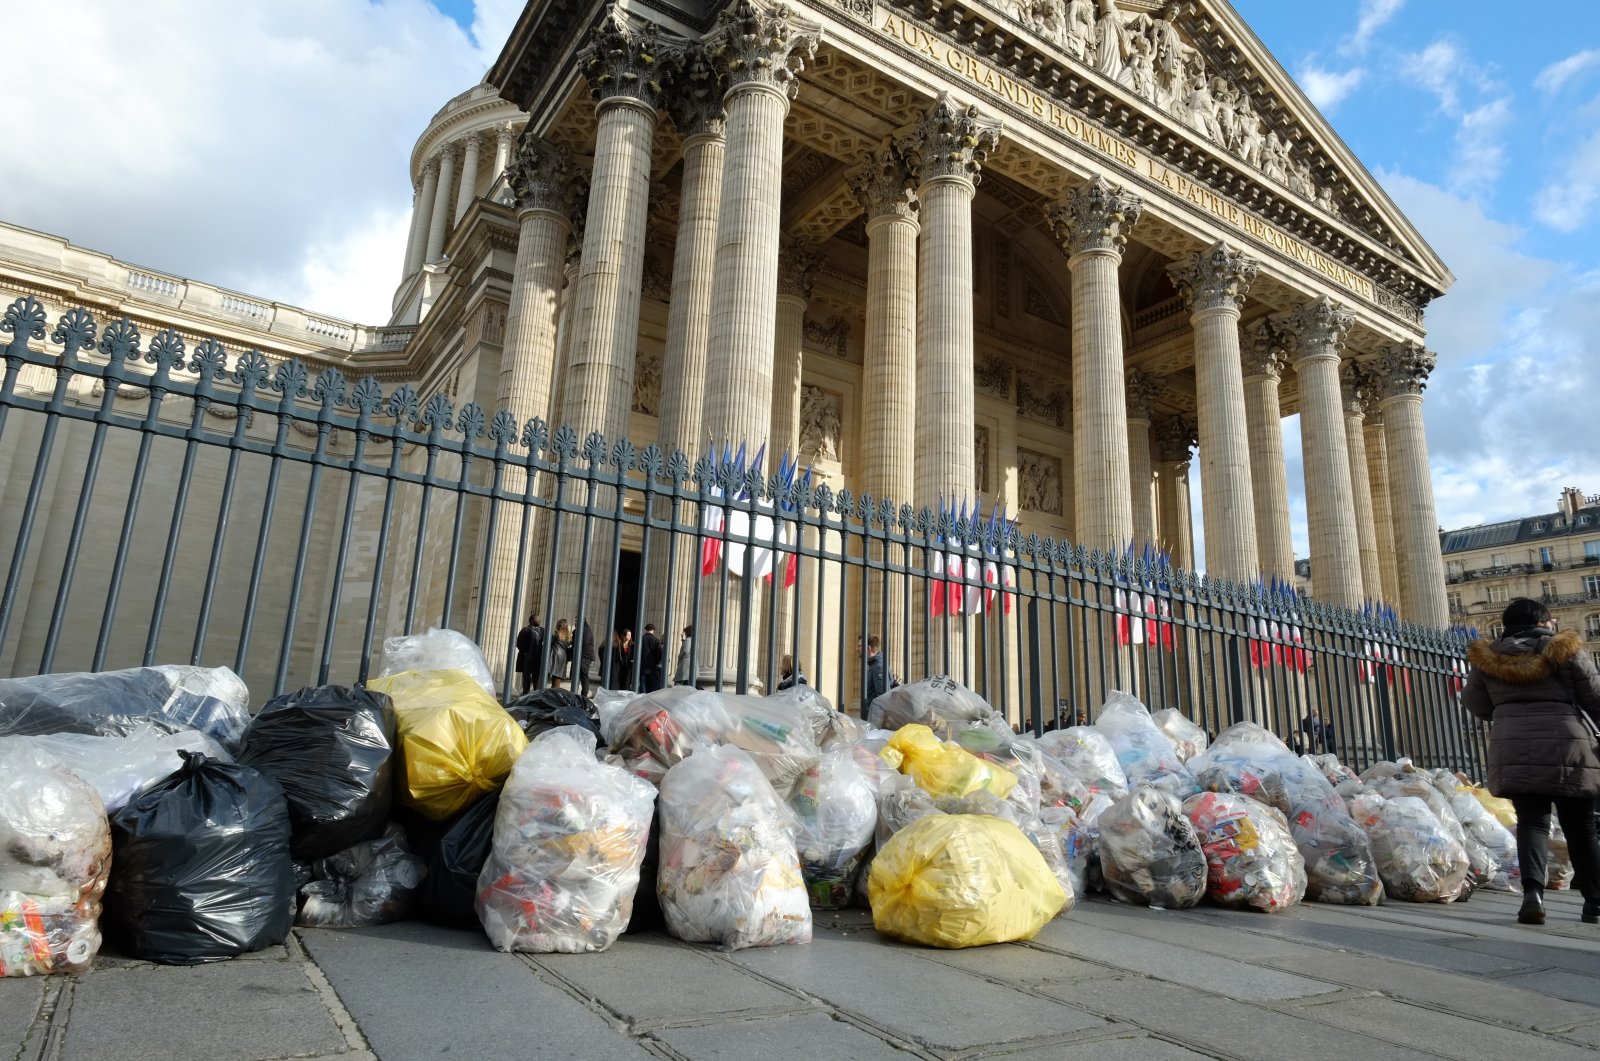 Garbage piled up in front of the Pantheon in Paris, March 19, 2023. (Shutterstock File Photo)